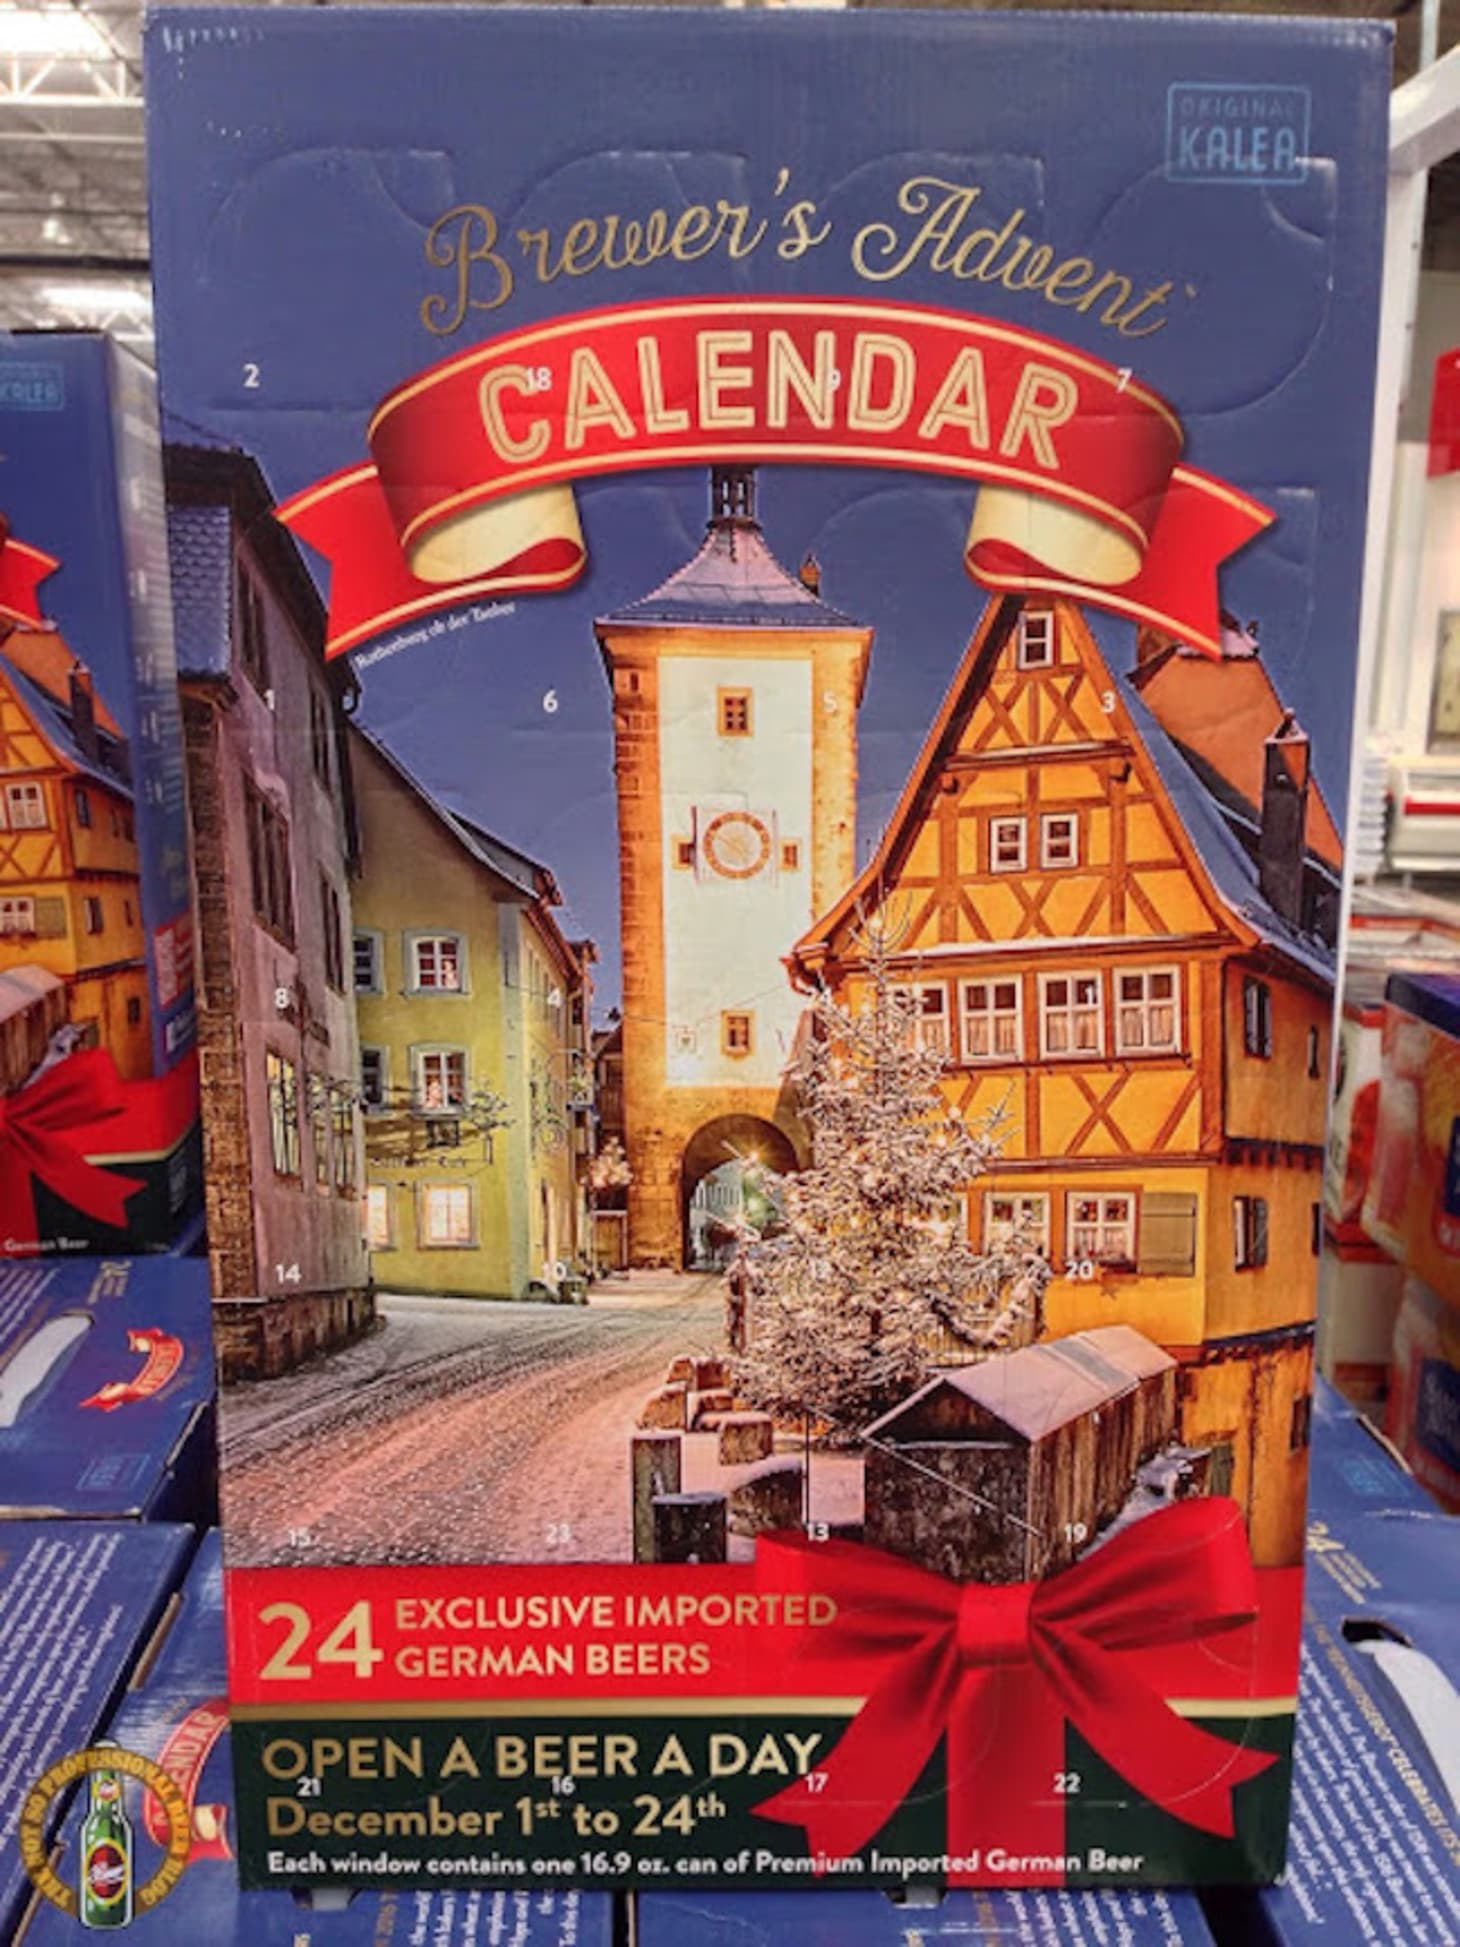 Count Down To Christmas With A Beer Advent Calendar | Kitchn For Advent Calendars Do.you.count Up Or Down